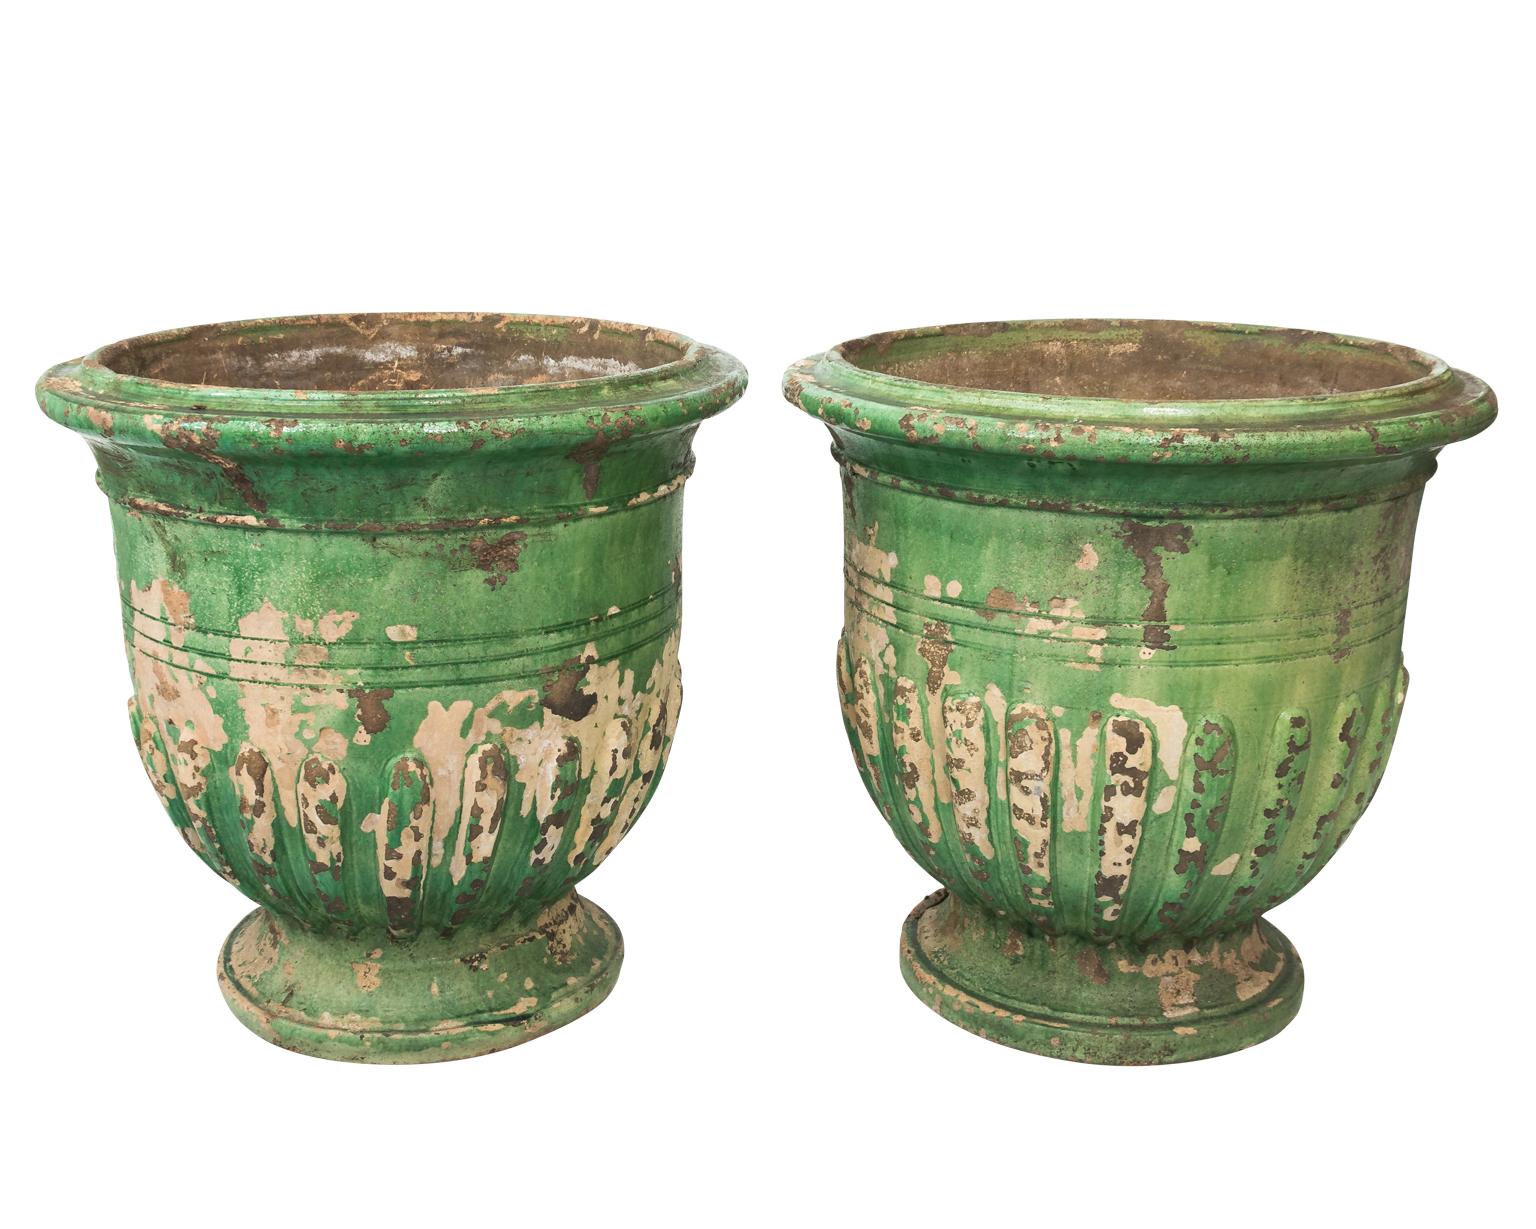 Large French green glazed urn in a distressed finish, circa 20th century. Please note of wear consistent with age causing paint loss.